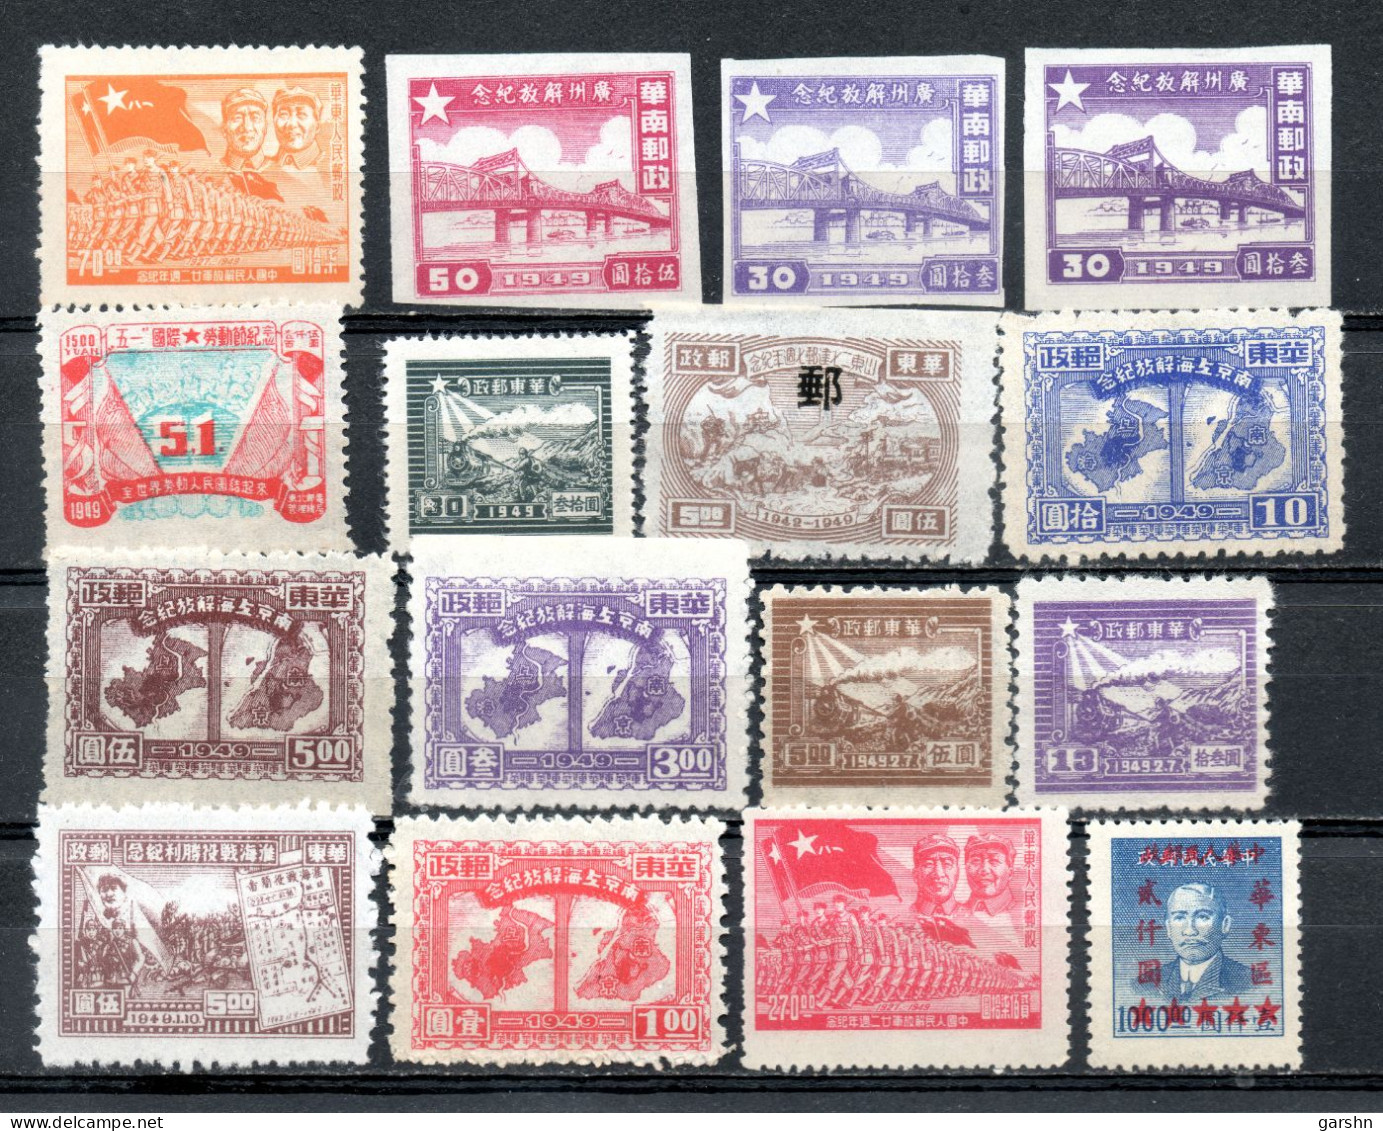 China Chine : (1 )  Lot De Timbres Chine Communiste - Chine Orientale 1949-50